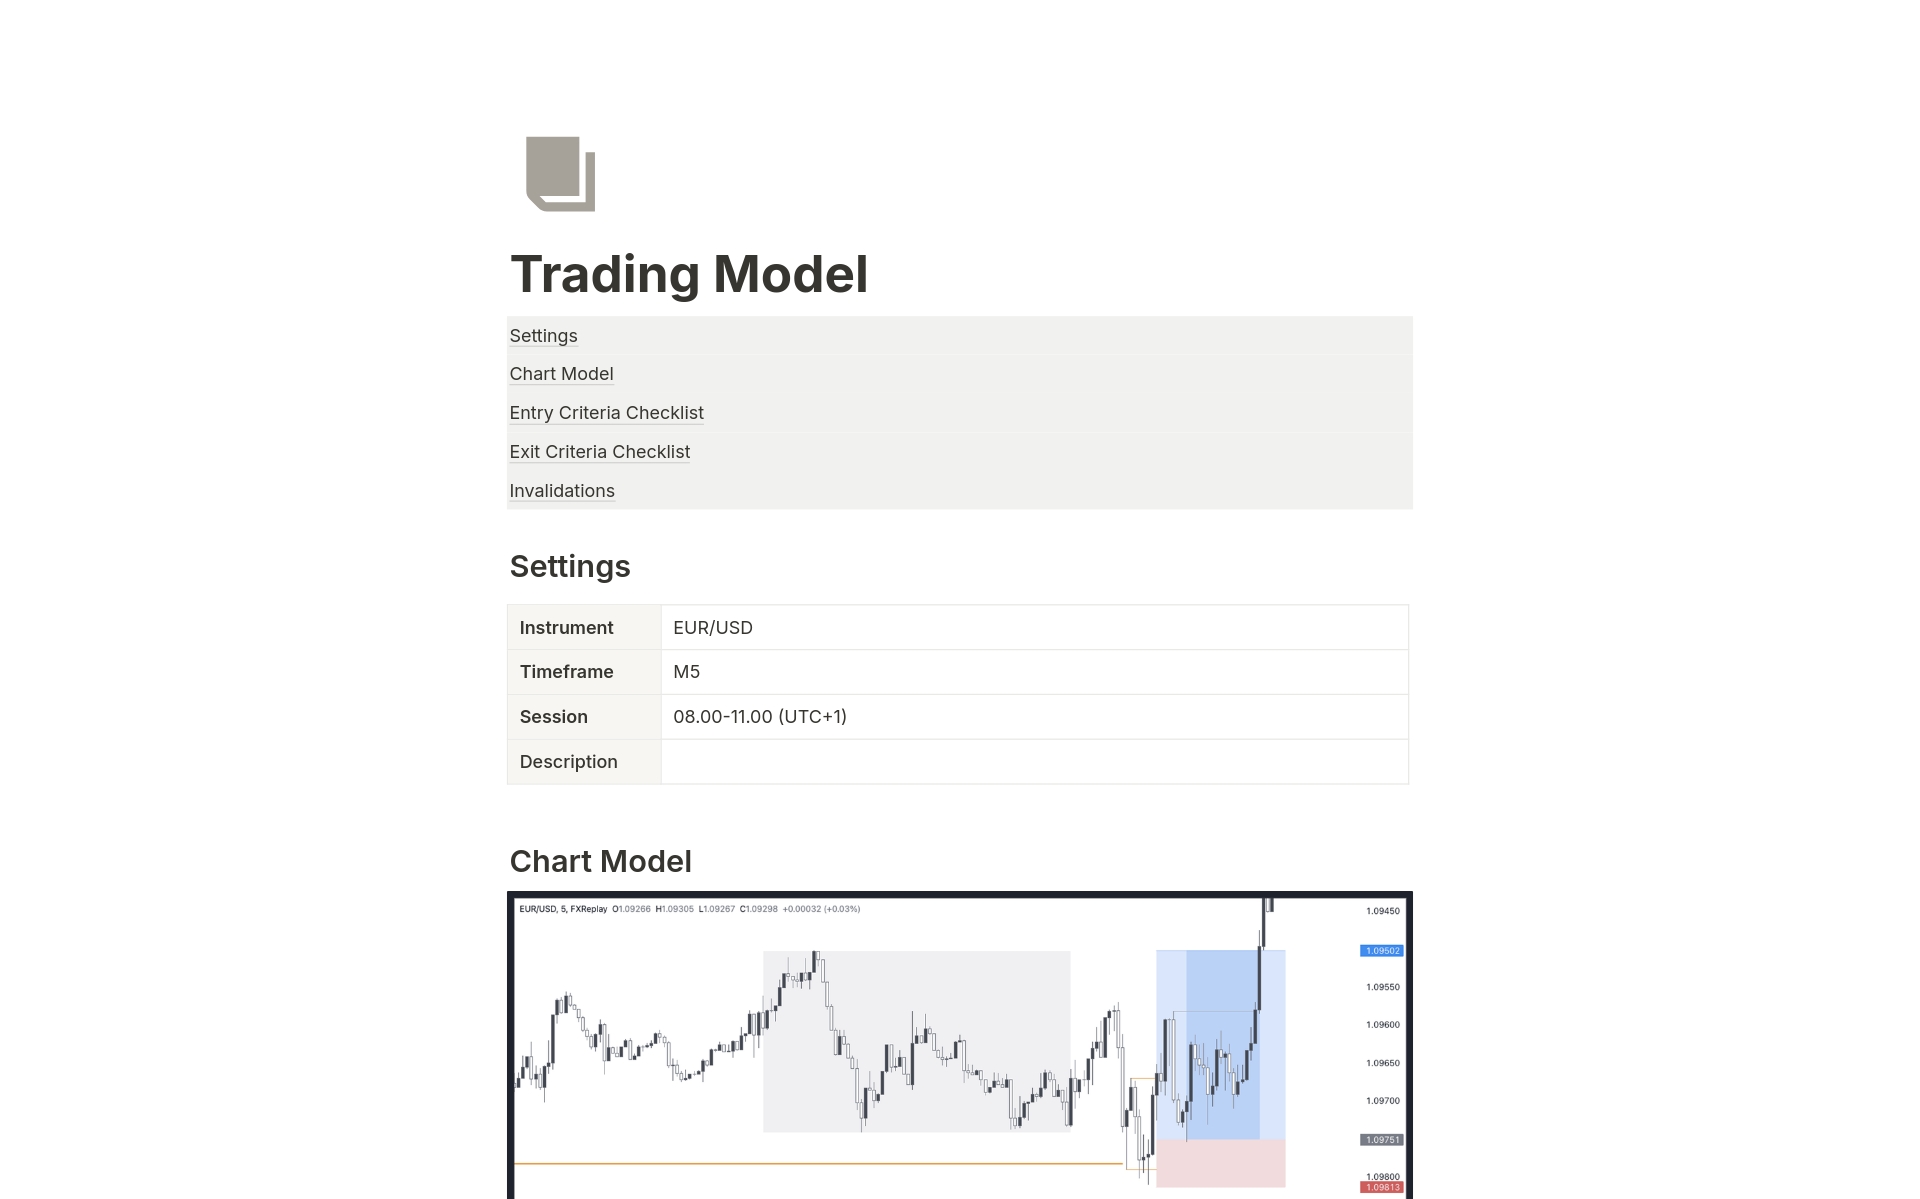 The template helps to create and follow rules-based trading strategies to improve the execution and management of operations, allowing traders to anticipate and plan for different market scenarios. It can be set up as a journal template.